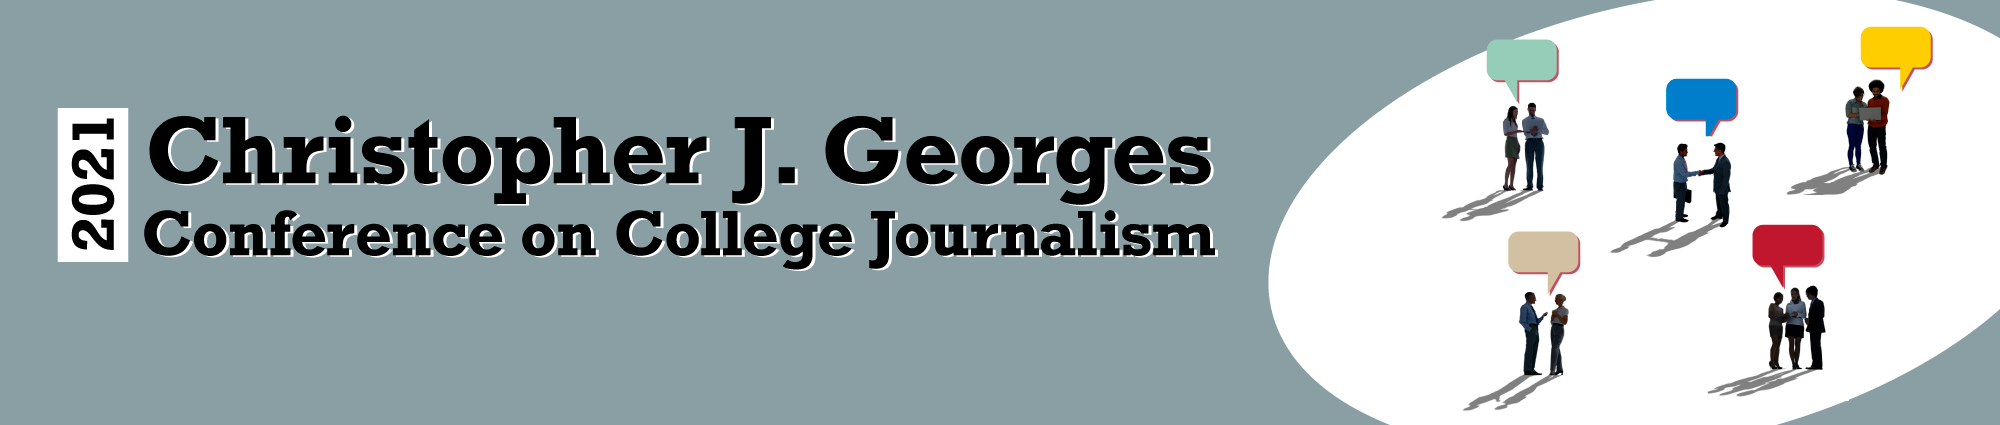 Banner Image for 2021 Christopher J. Georges Conference on College Journalism